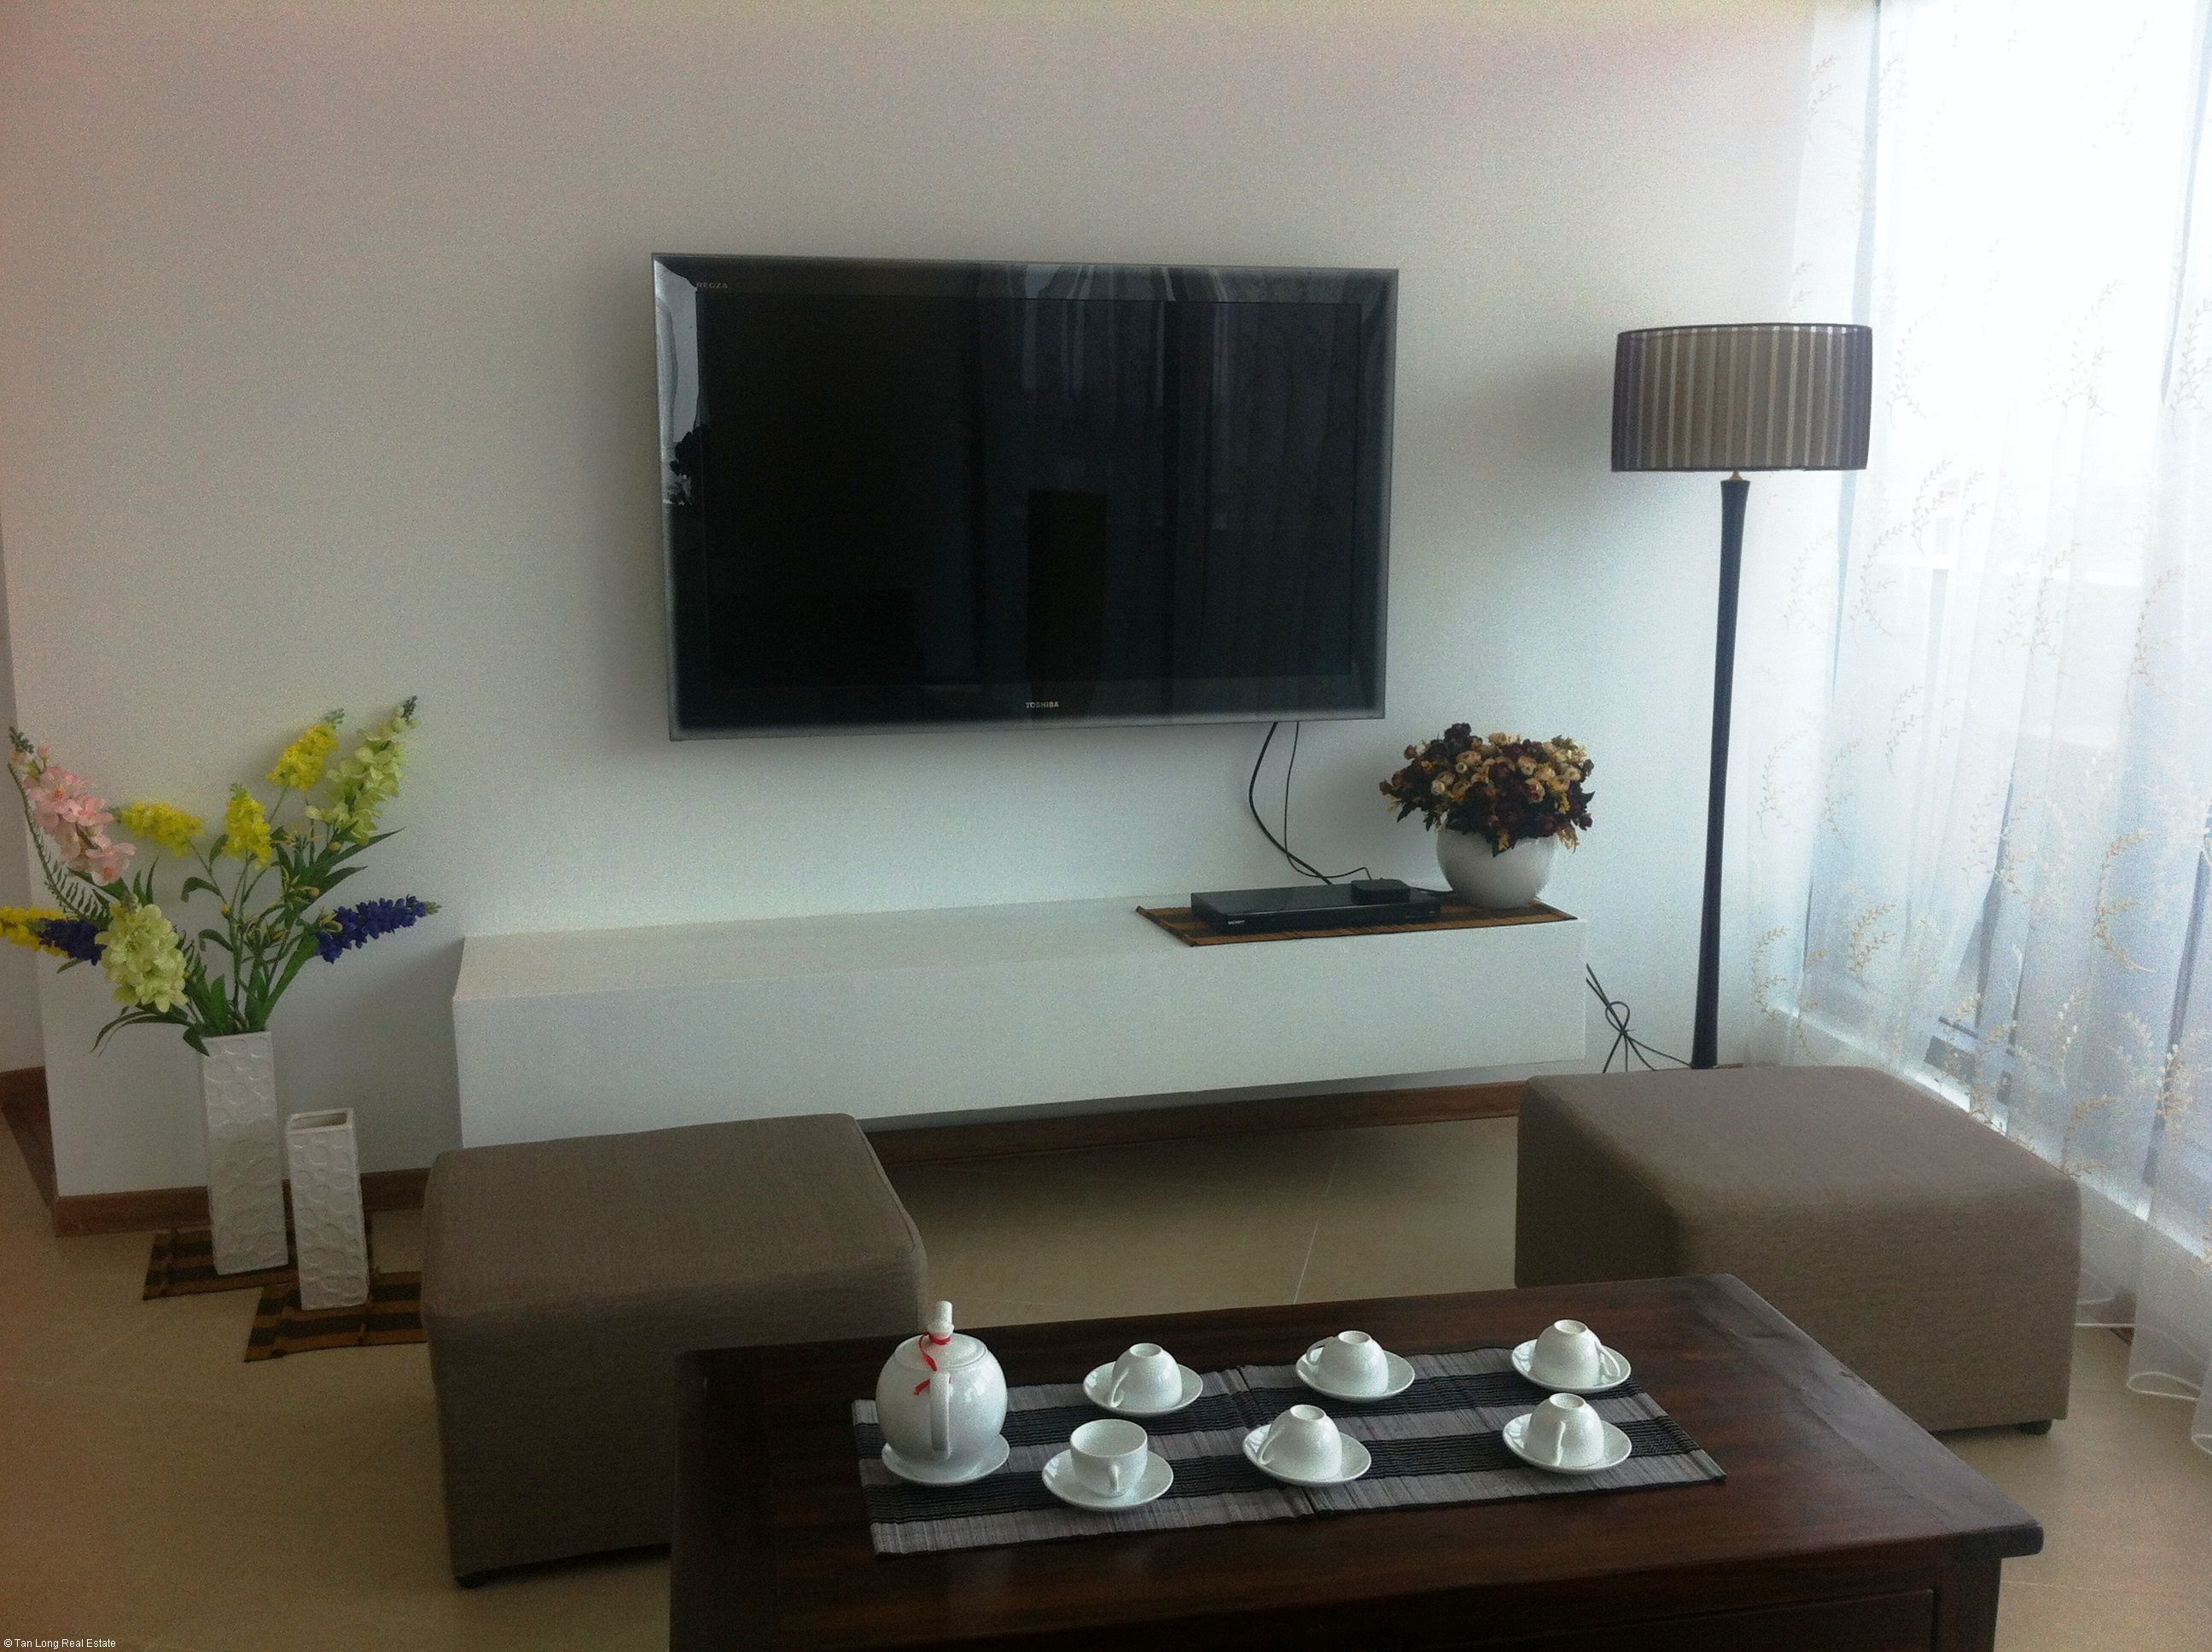 2 bedroom apartment for rent in Eurowindow Multi Complex, Tran Duy Hung str, Cau Giay dist 1